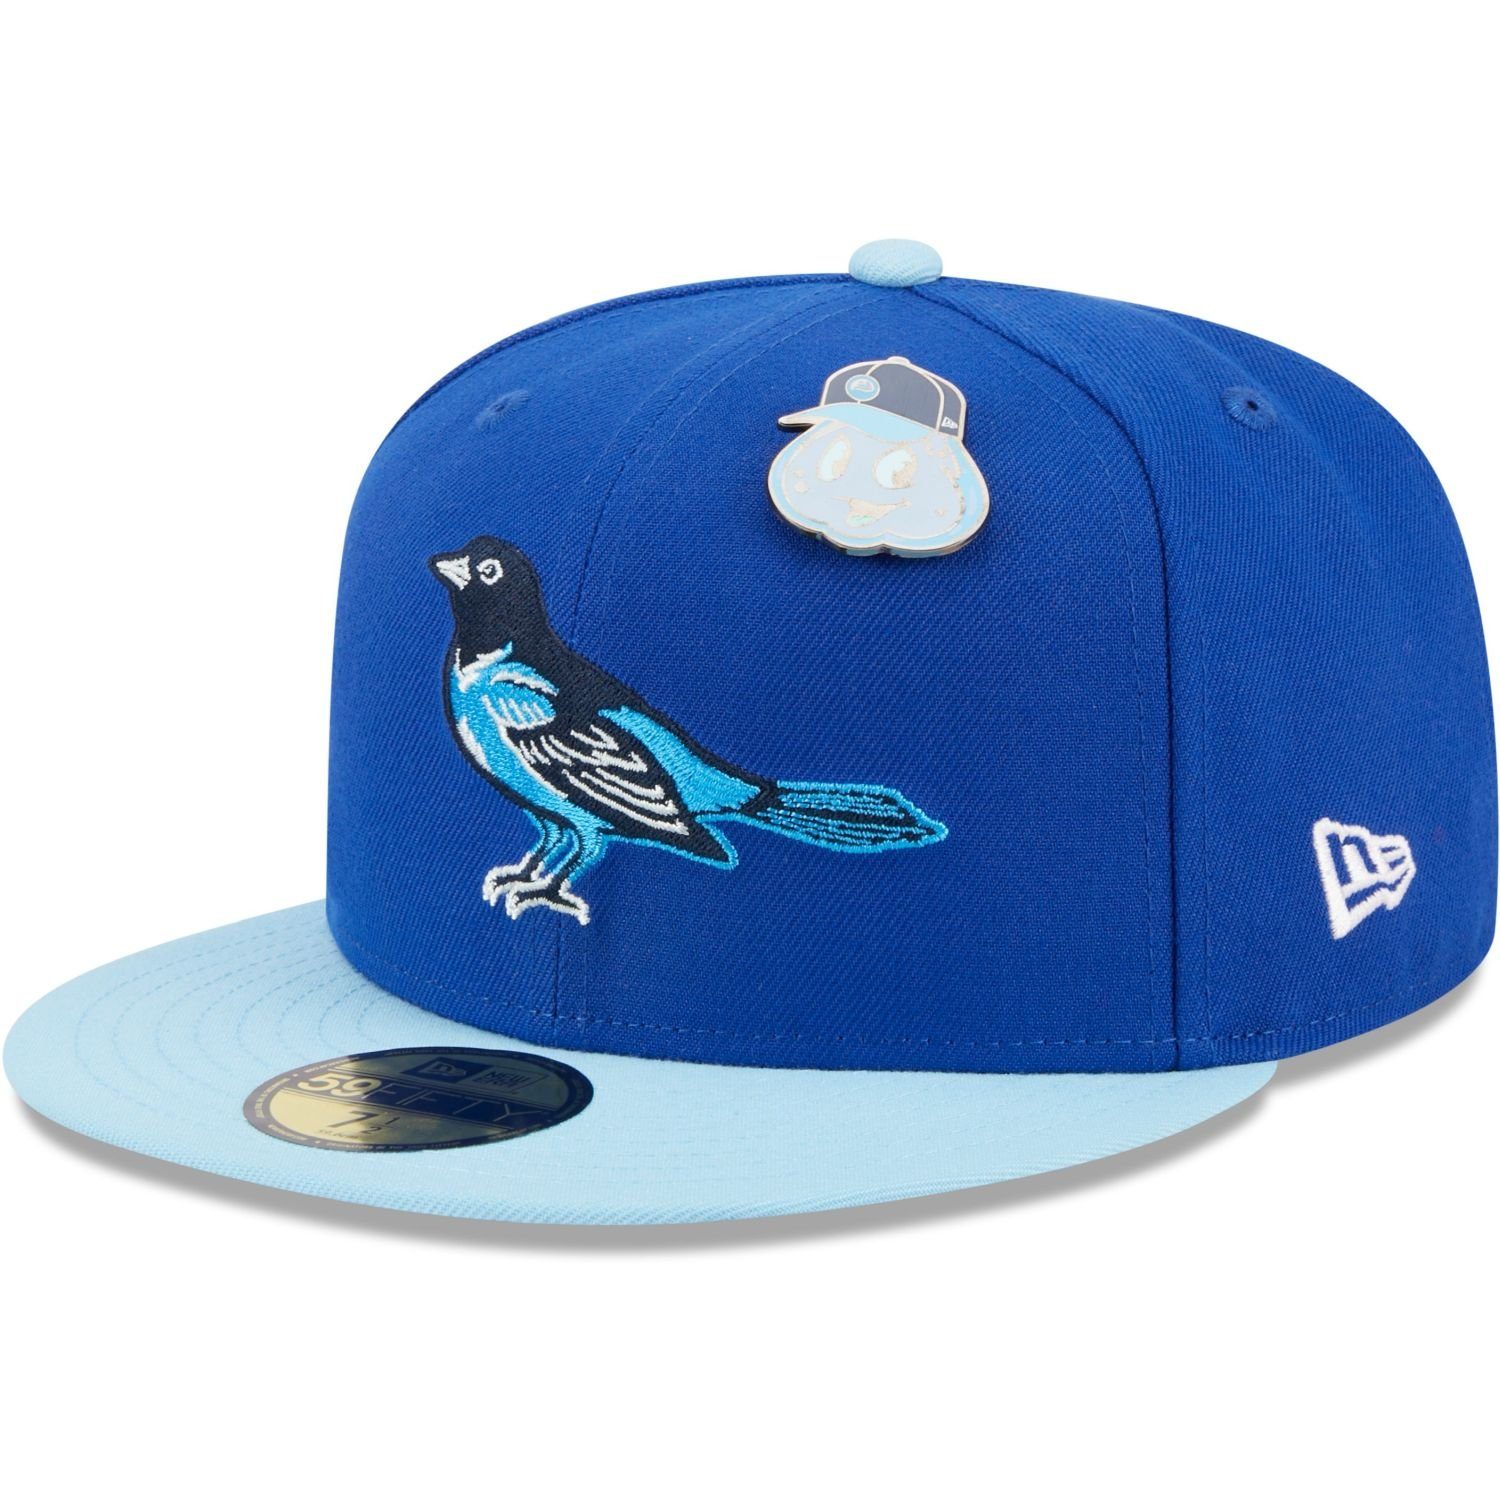 New Era Fitted Cap 59Fifty ELEMENTS PIN Baltimore Orioles | Fitted Caps